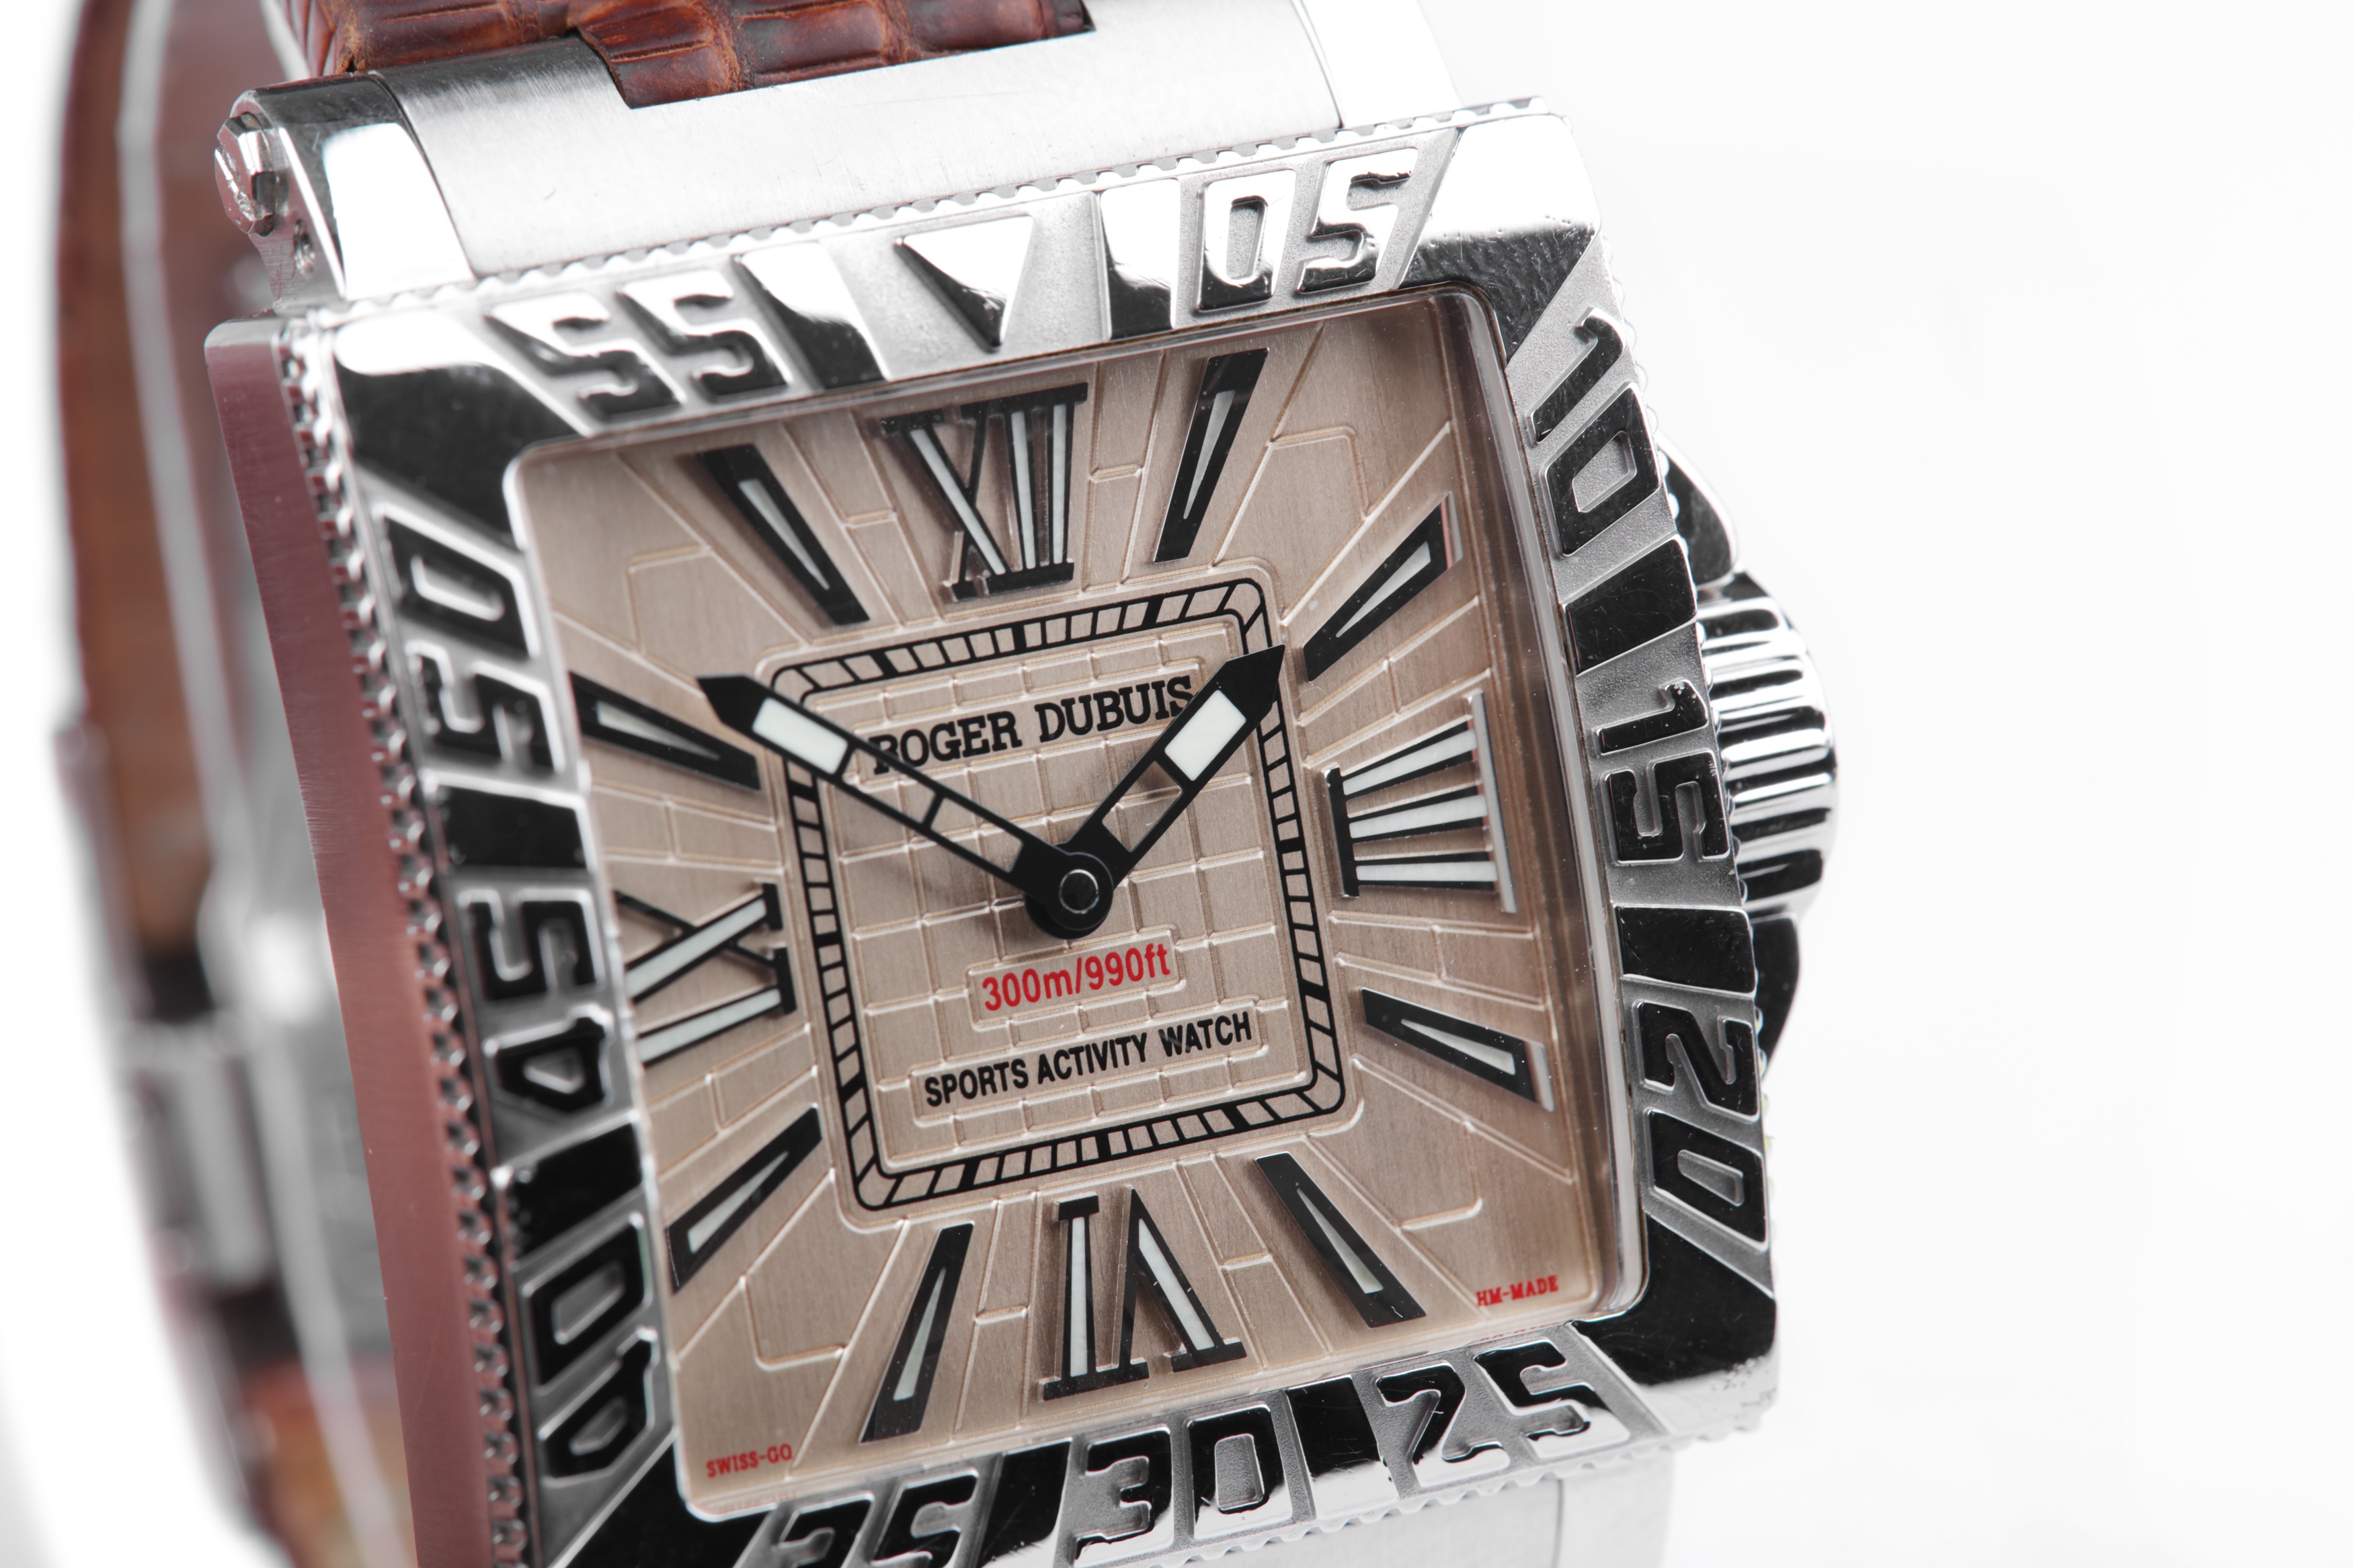 ROGER DUBUIS. - Image 3 of 8